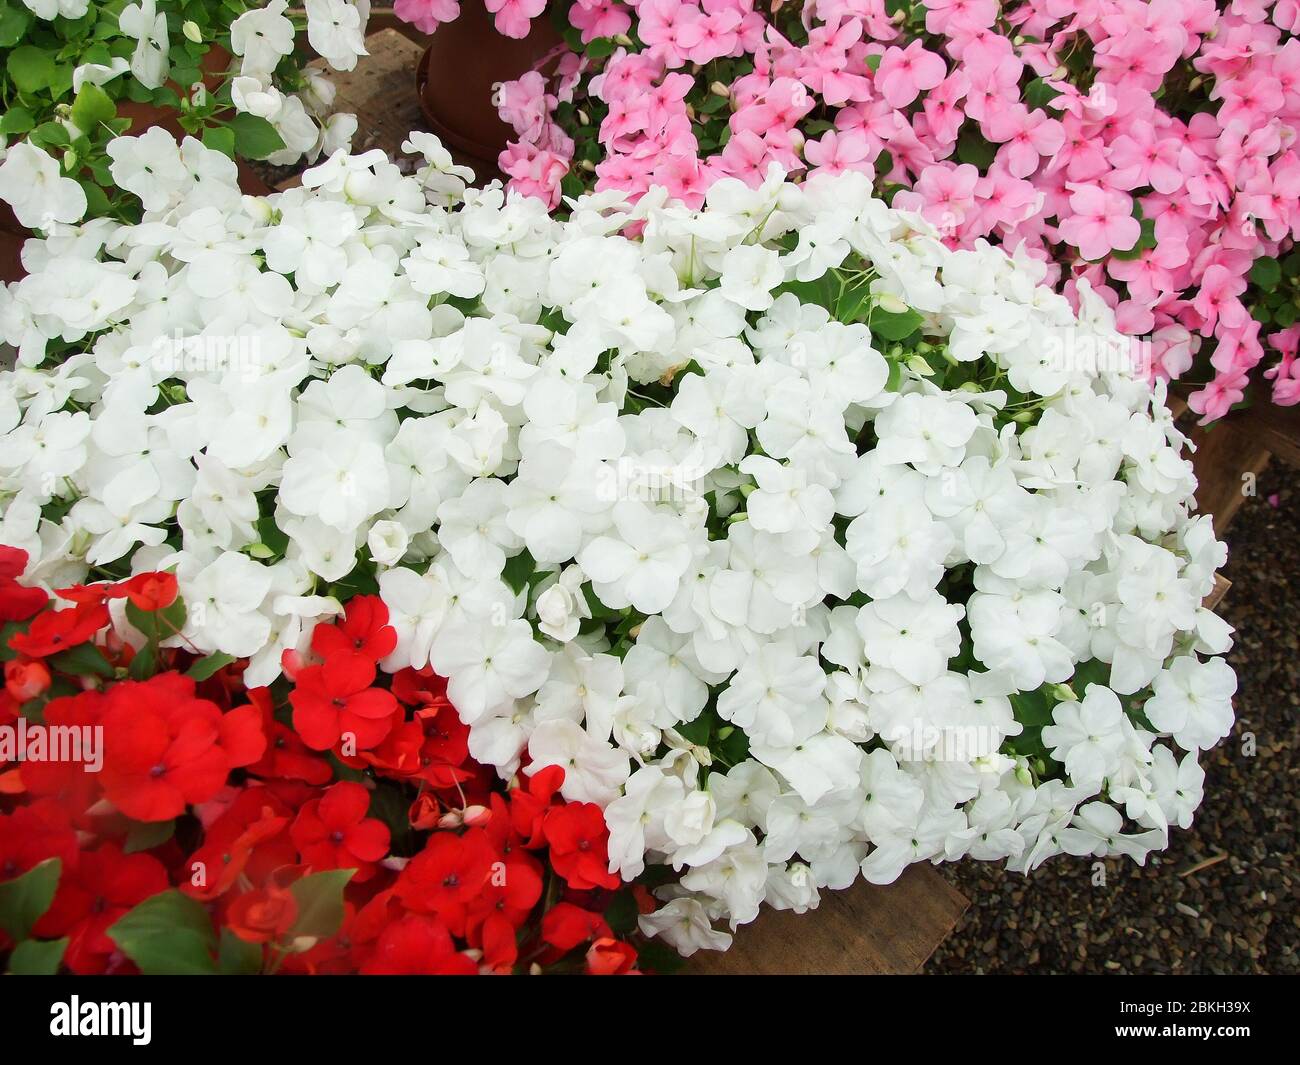 pink, red, white impatiens, scientific name Impatiens walleriana flowers also called Balsam, flowerbed of blossoms in pink Stock Photo